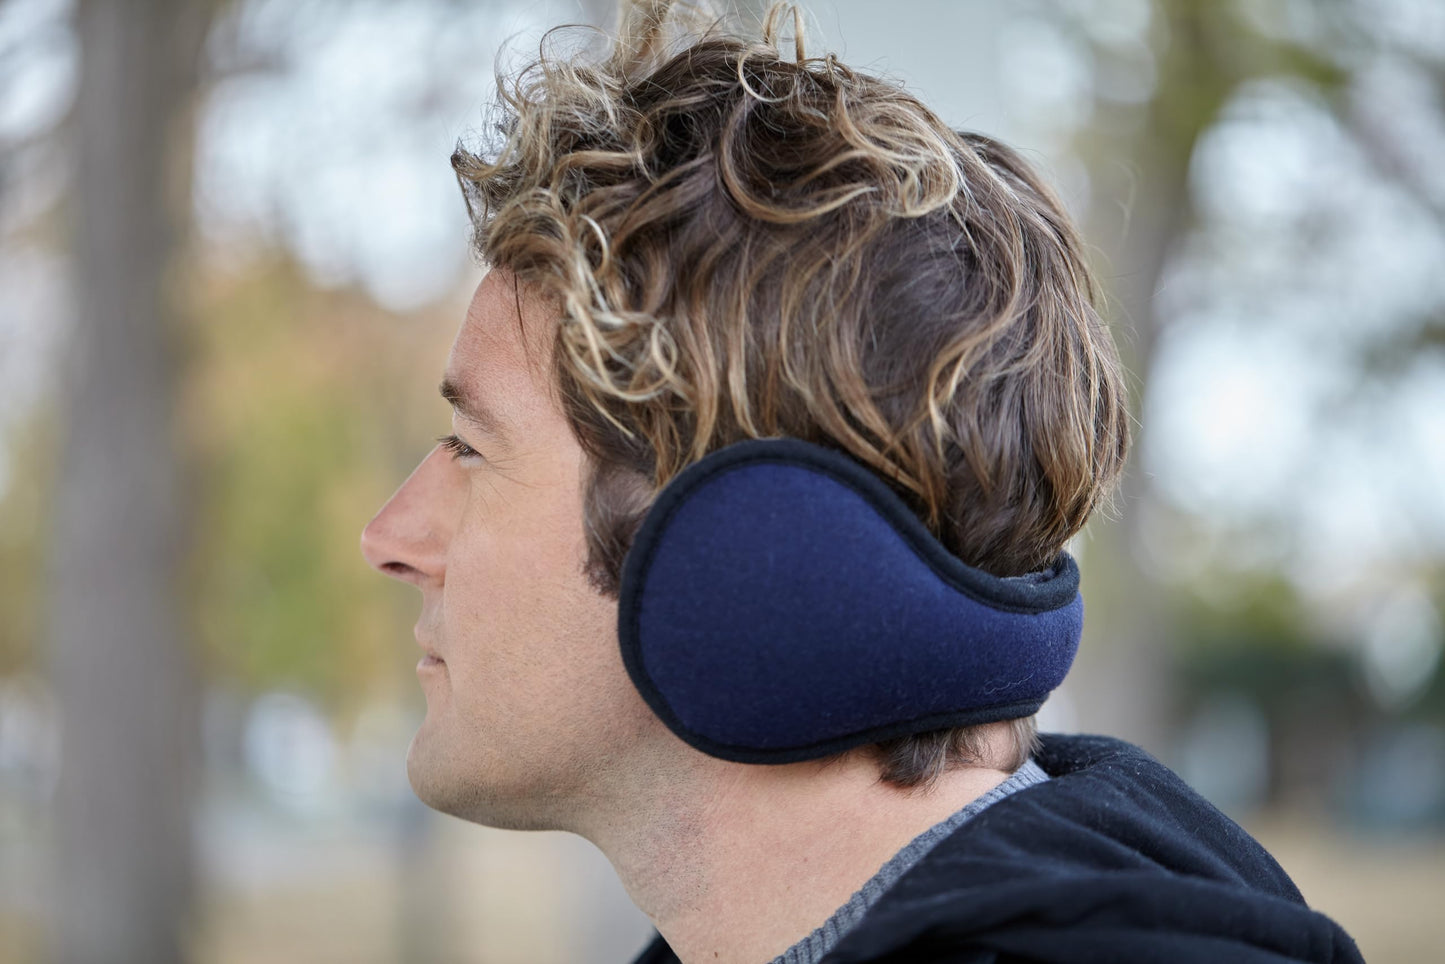 Adjustable Ear Muffs by Funky Junque